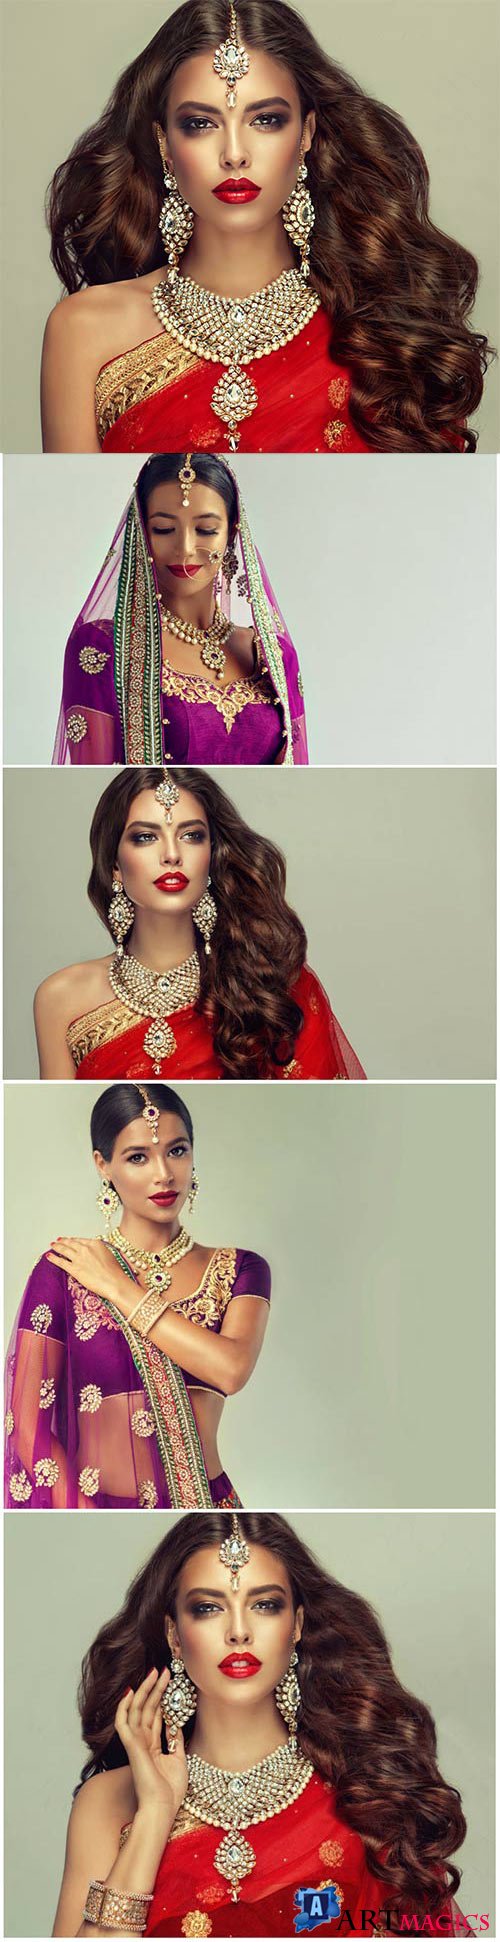 Luxurious indian girls in traditional dresses stock photo